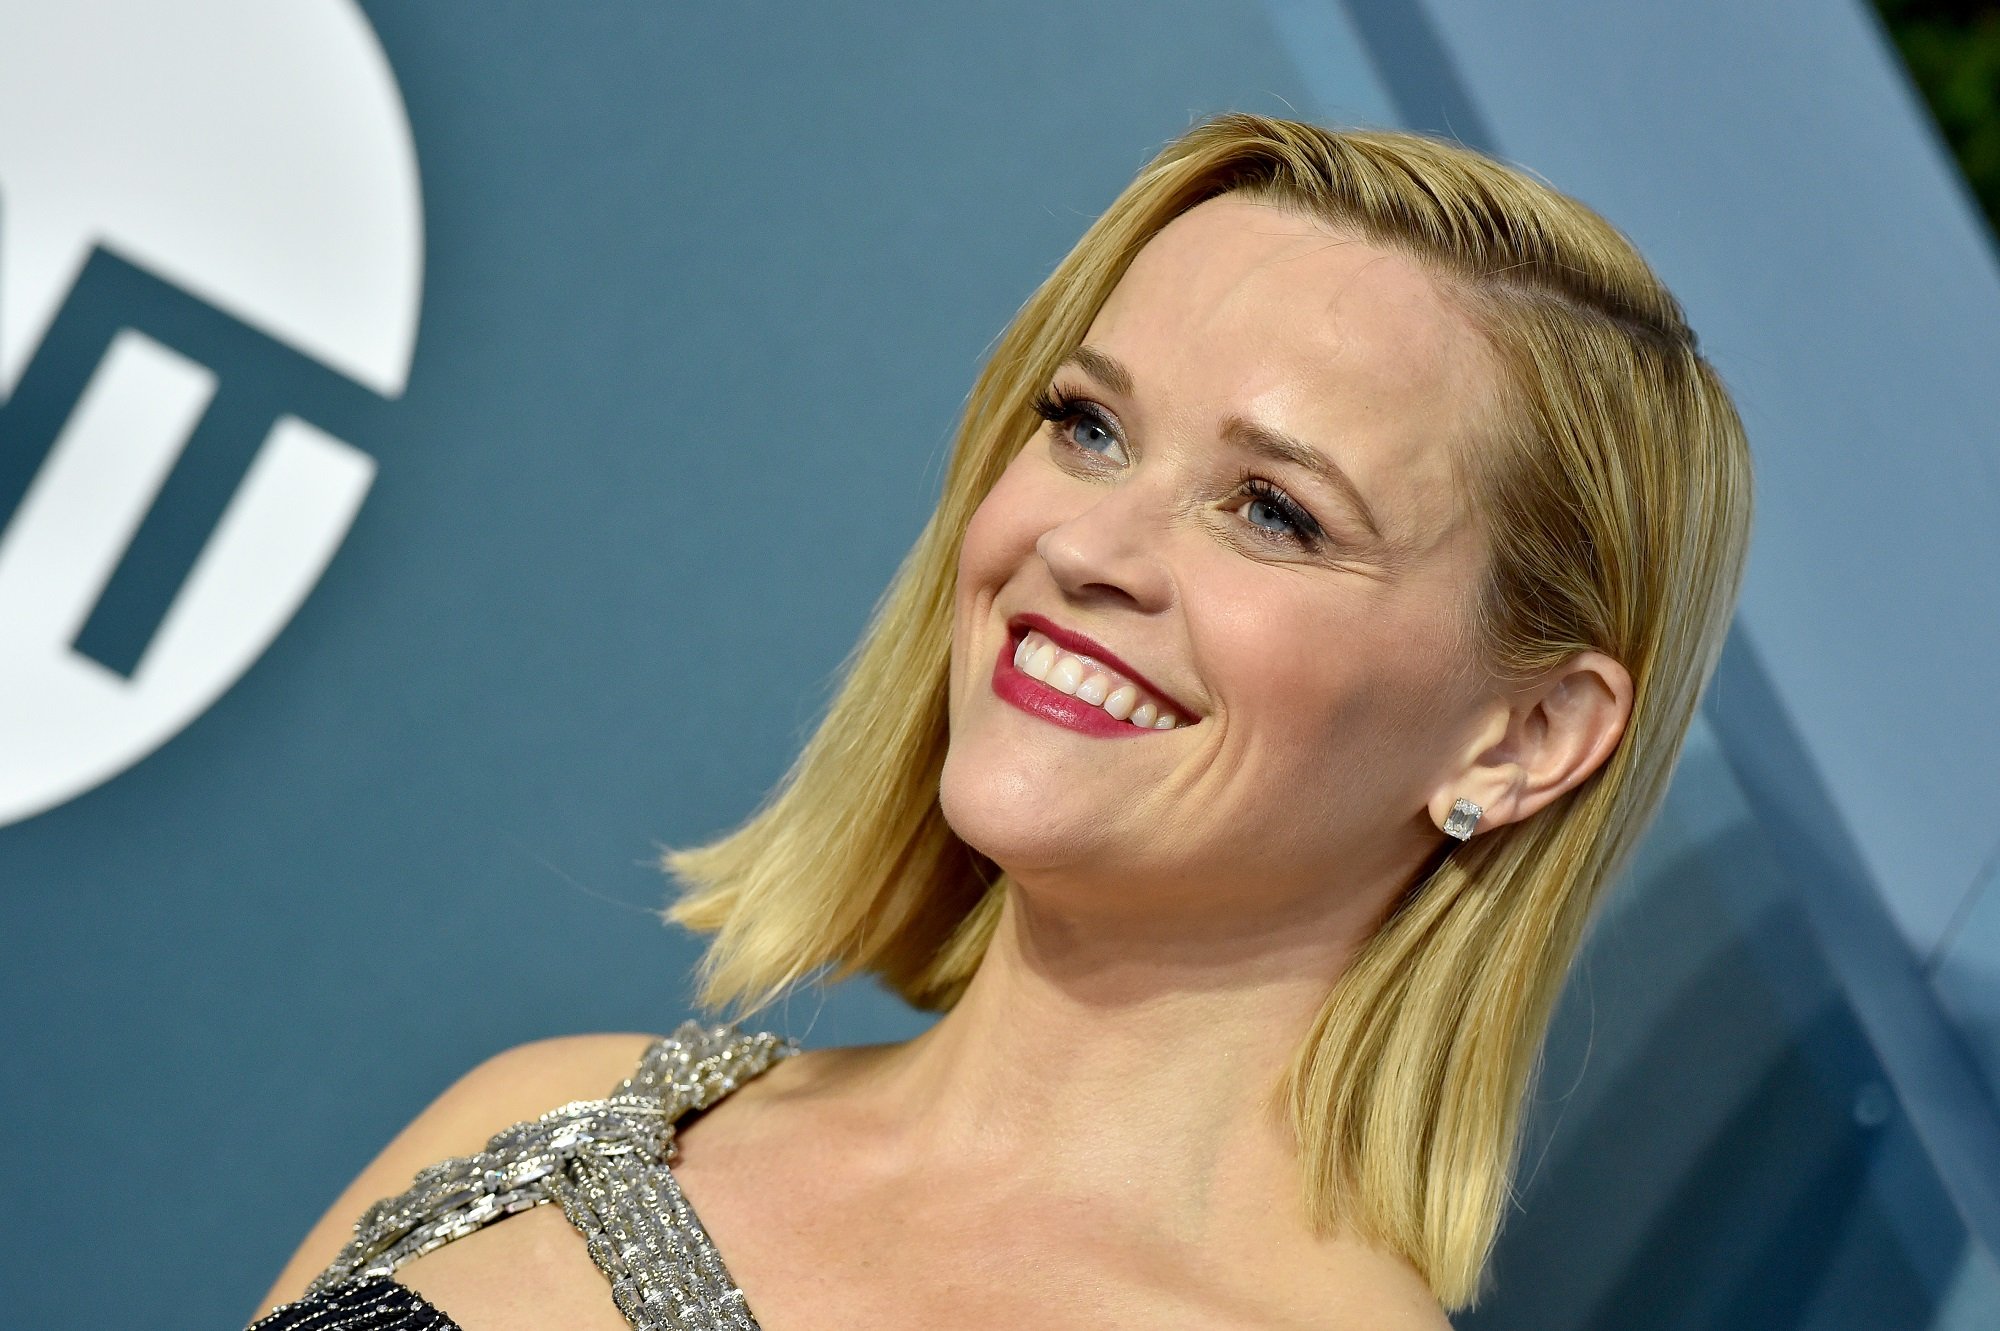 Reese Witherspoon Had a ‘Major Crush’ On This ‘Harry Potter’ Star With His Pics on Her Wall